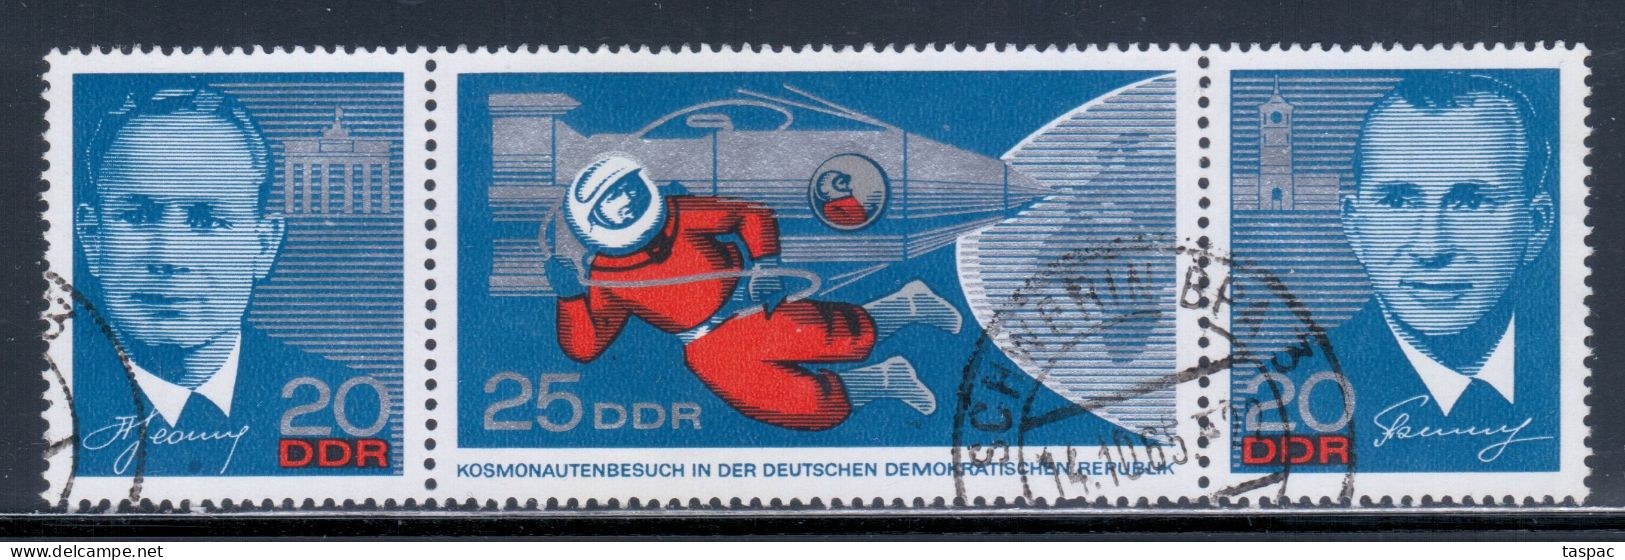 East Germany / DDR 1965 Mi# 1138-1140 Used - Strip Of 3 - Visit Of The Russian Cosmonauts / Space - Europe